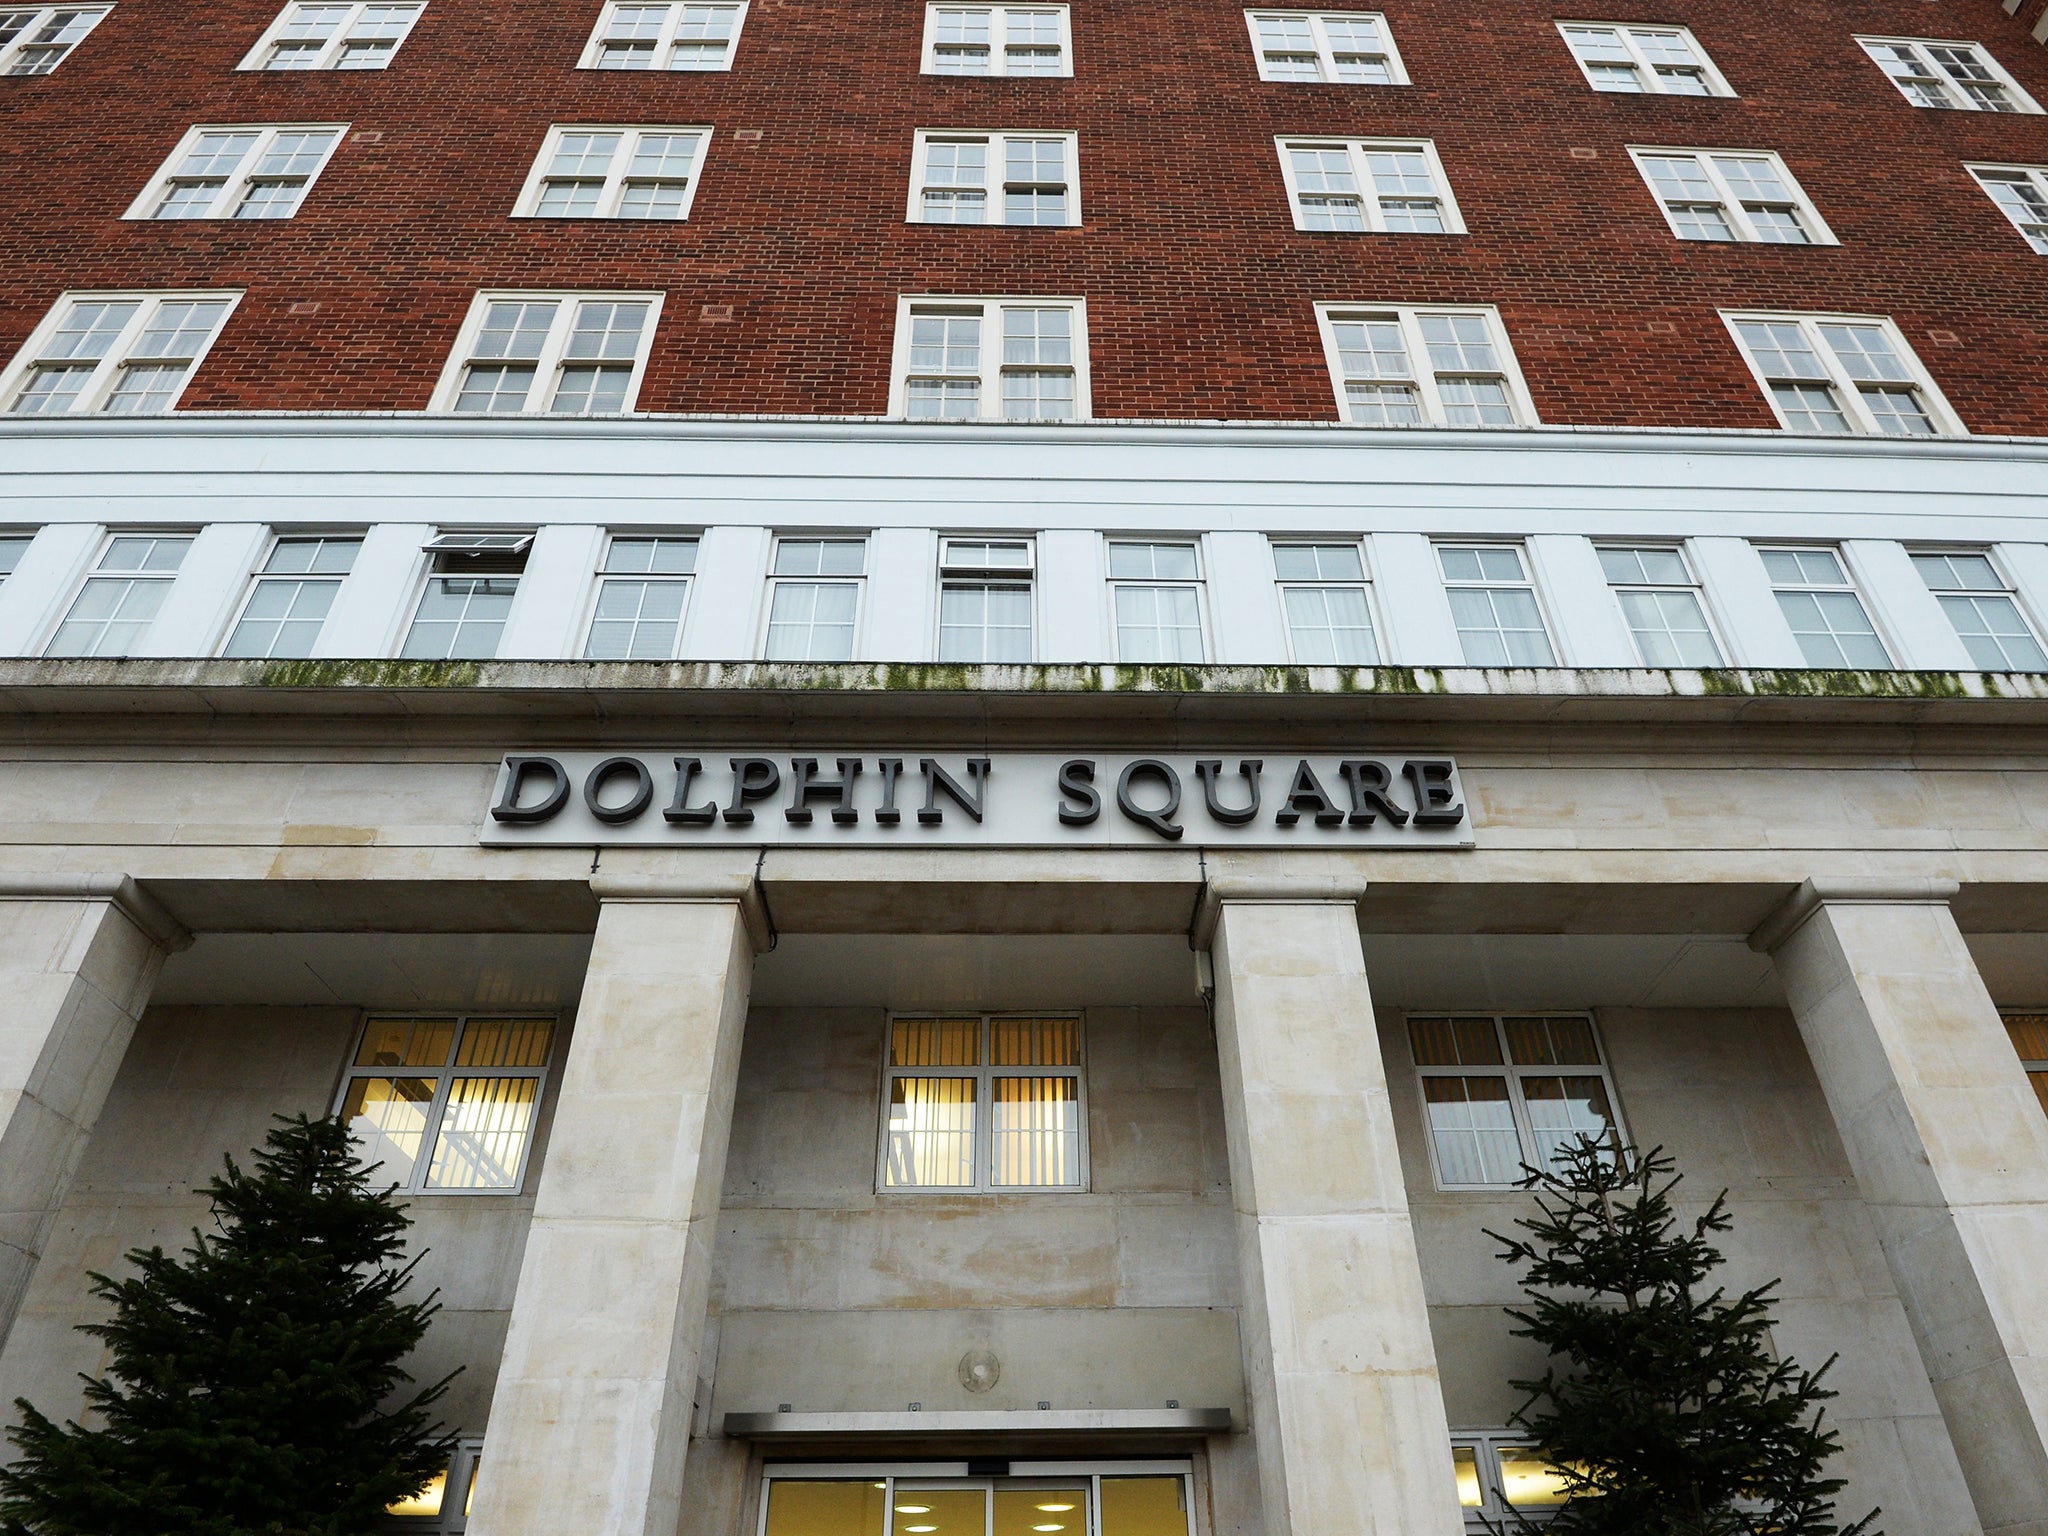 Operation Midland has already been set up to investigate child sex abuse claims at Dolphin Square